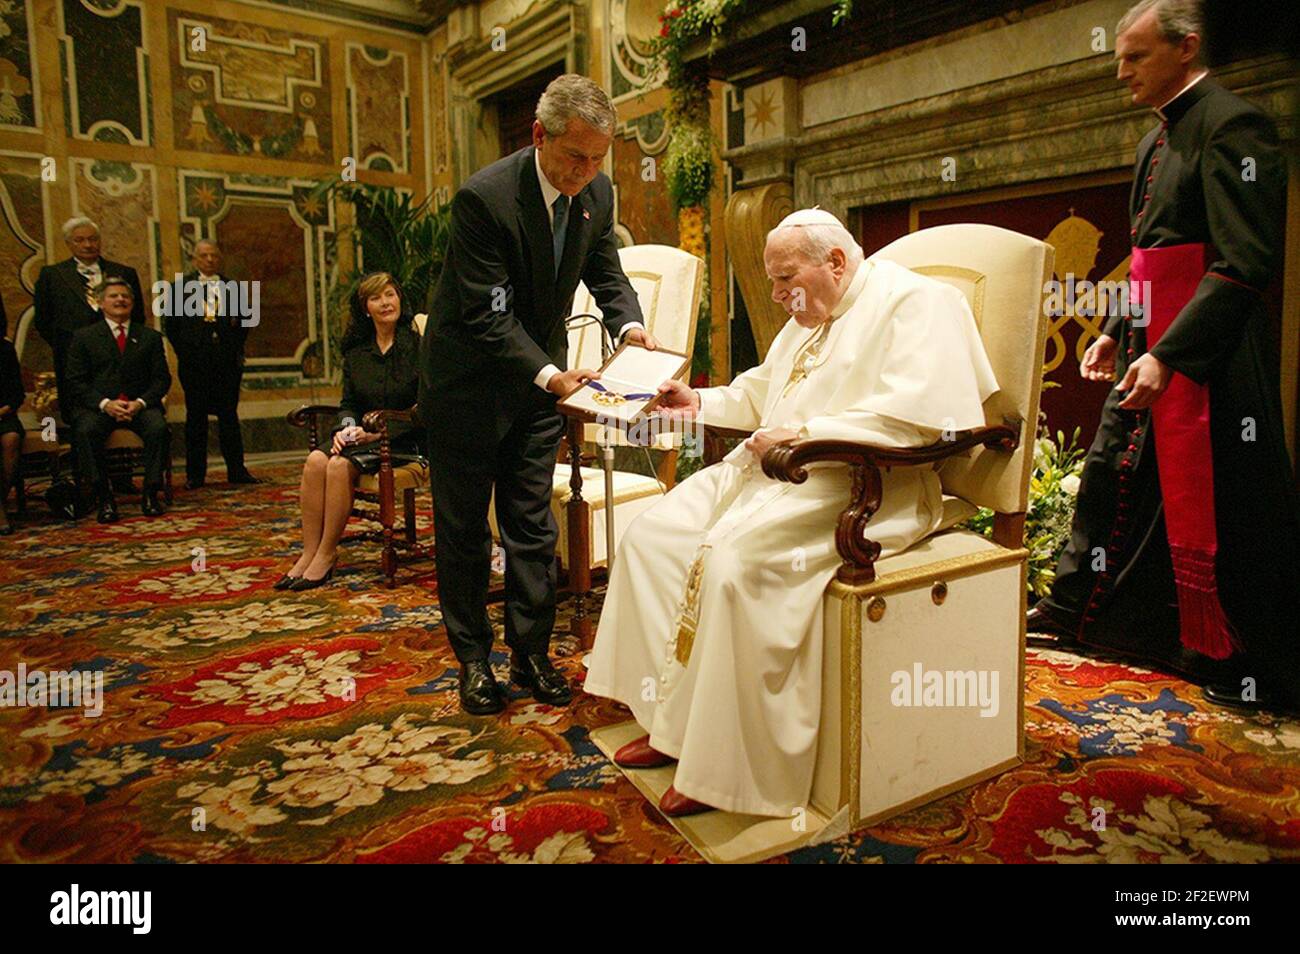 President George W. Bush presents the Medal of Freedom to Pope John Paul II. Stock Photo